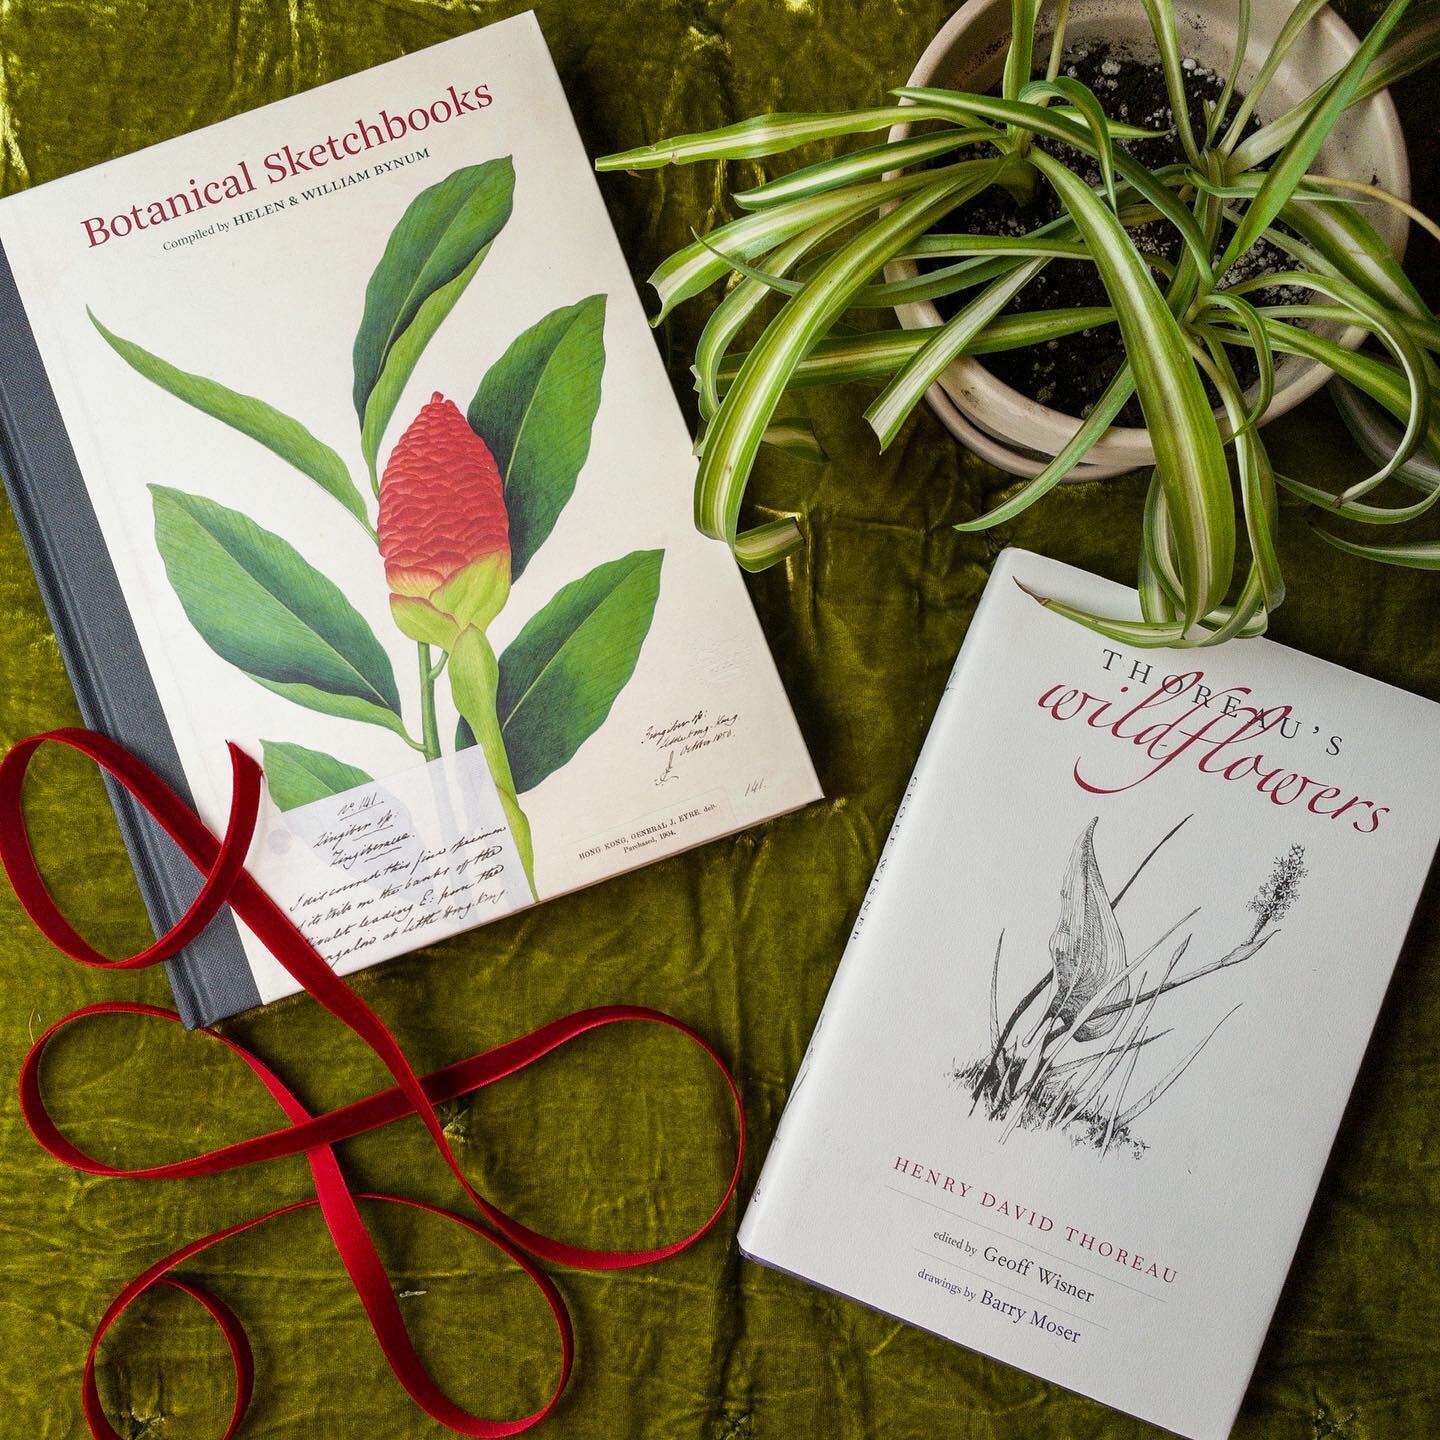 For the kind-spirited gardener in our lives: a great pairing of botanical-themed volumes, plus a little plantling propagated from one of our own!

Botanical Sketchbooks includes beautiful sketches from over 80 artists and across 500 years. A real vis